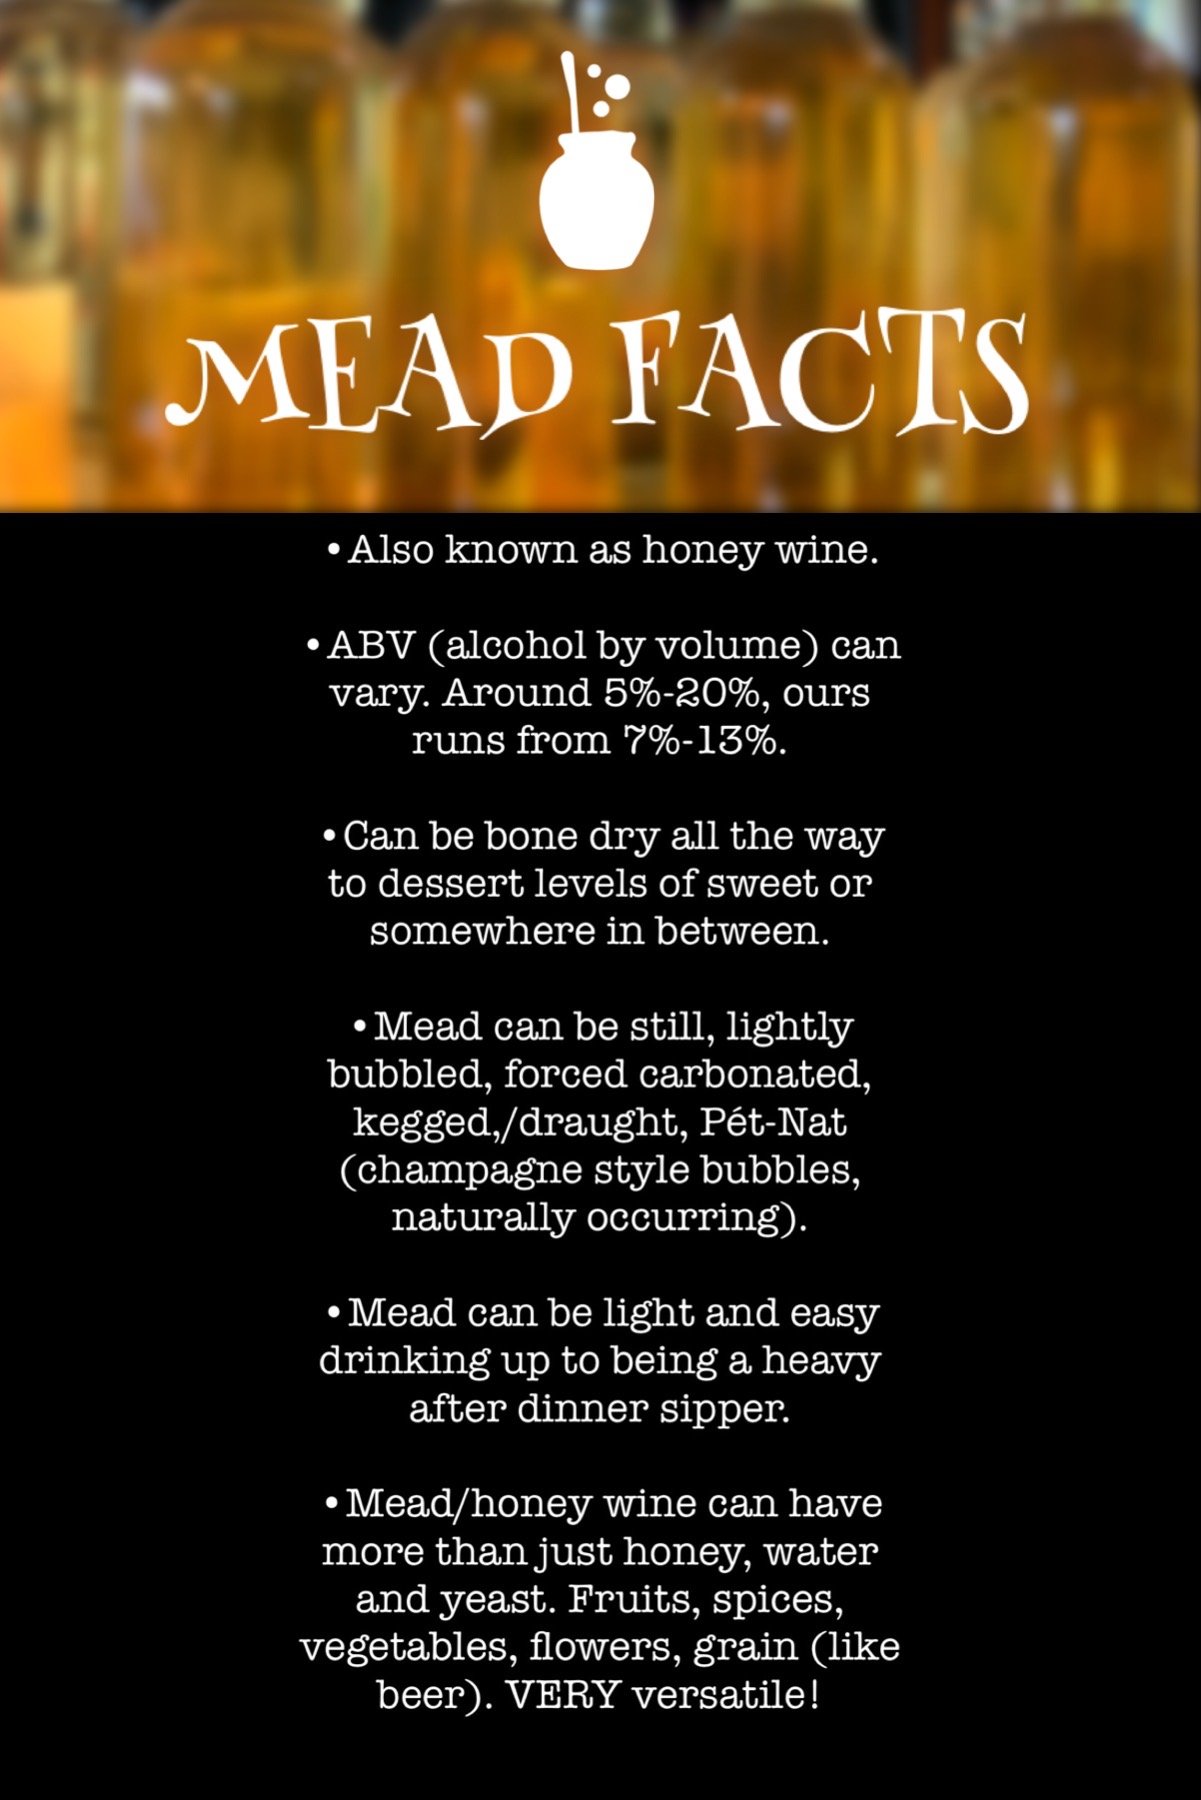 Mead Facts.JPG